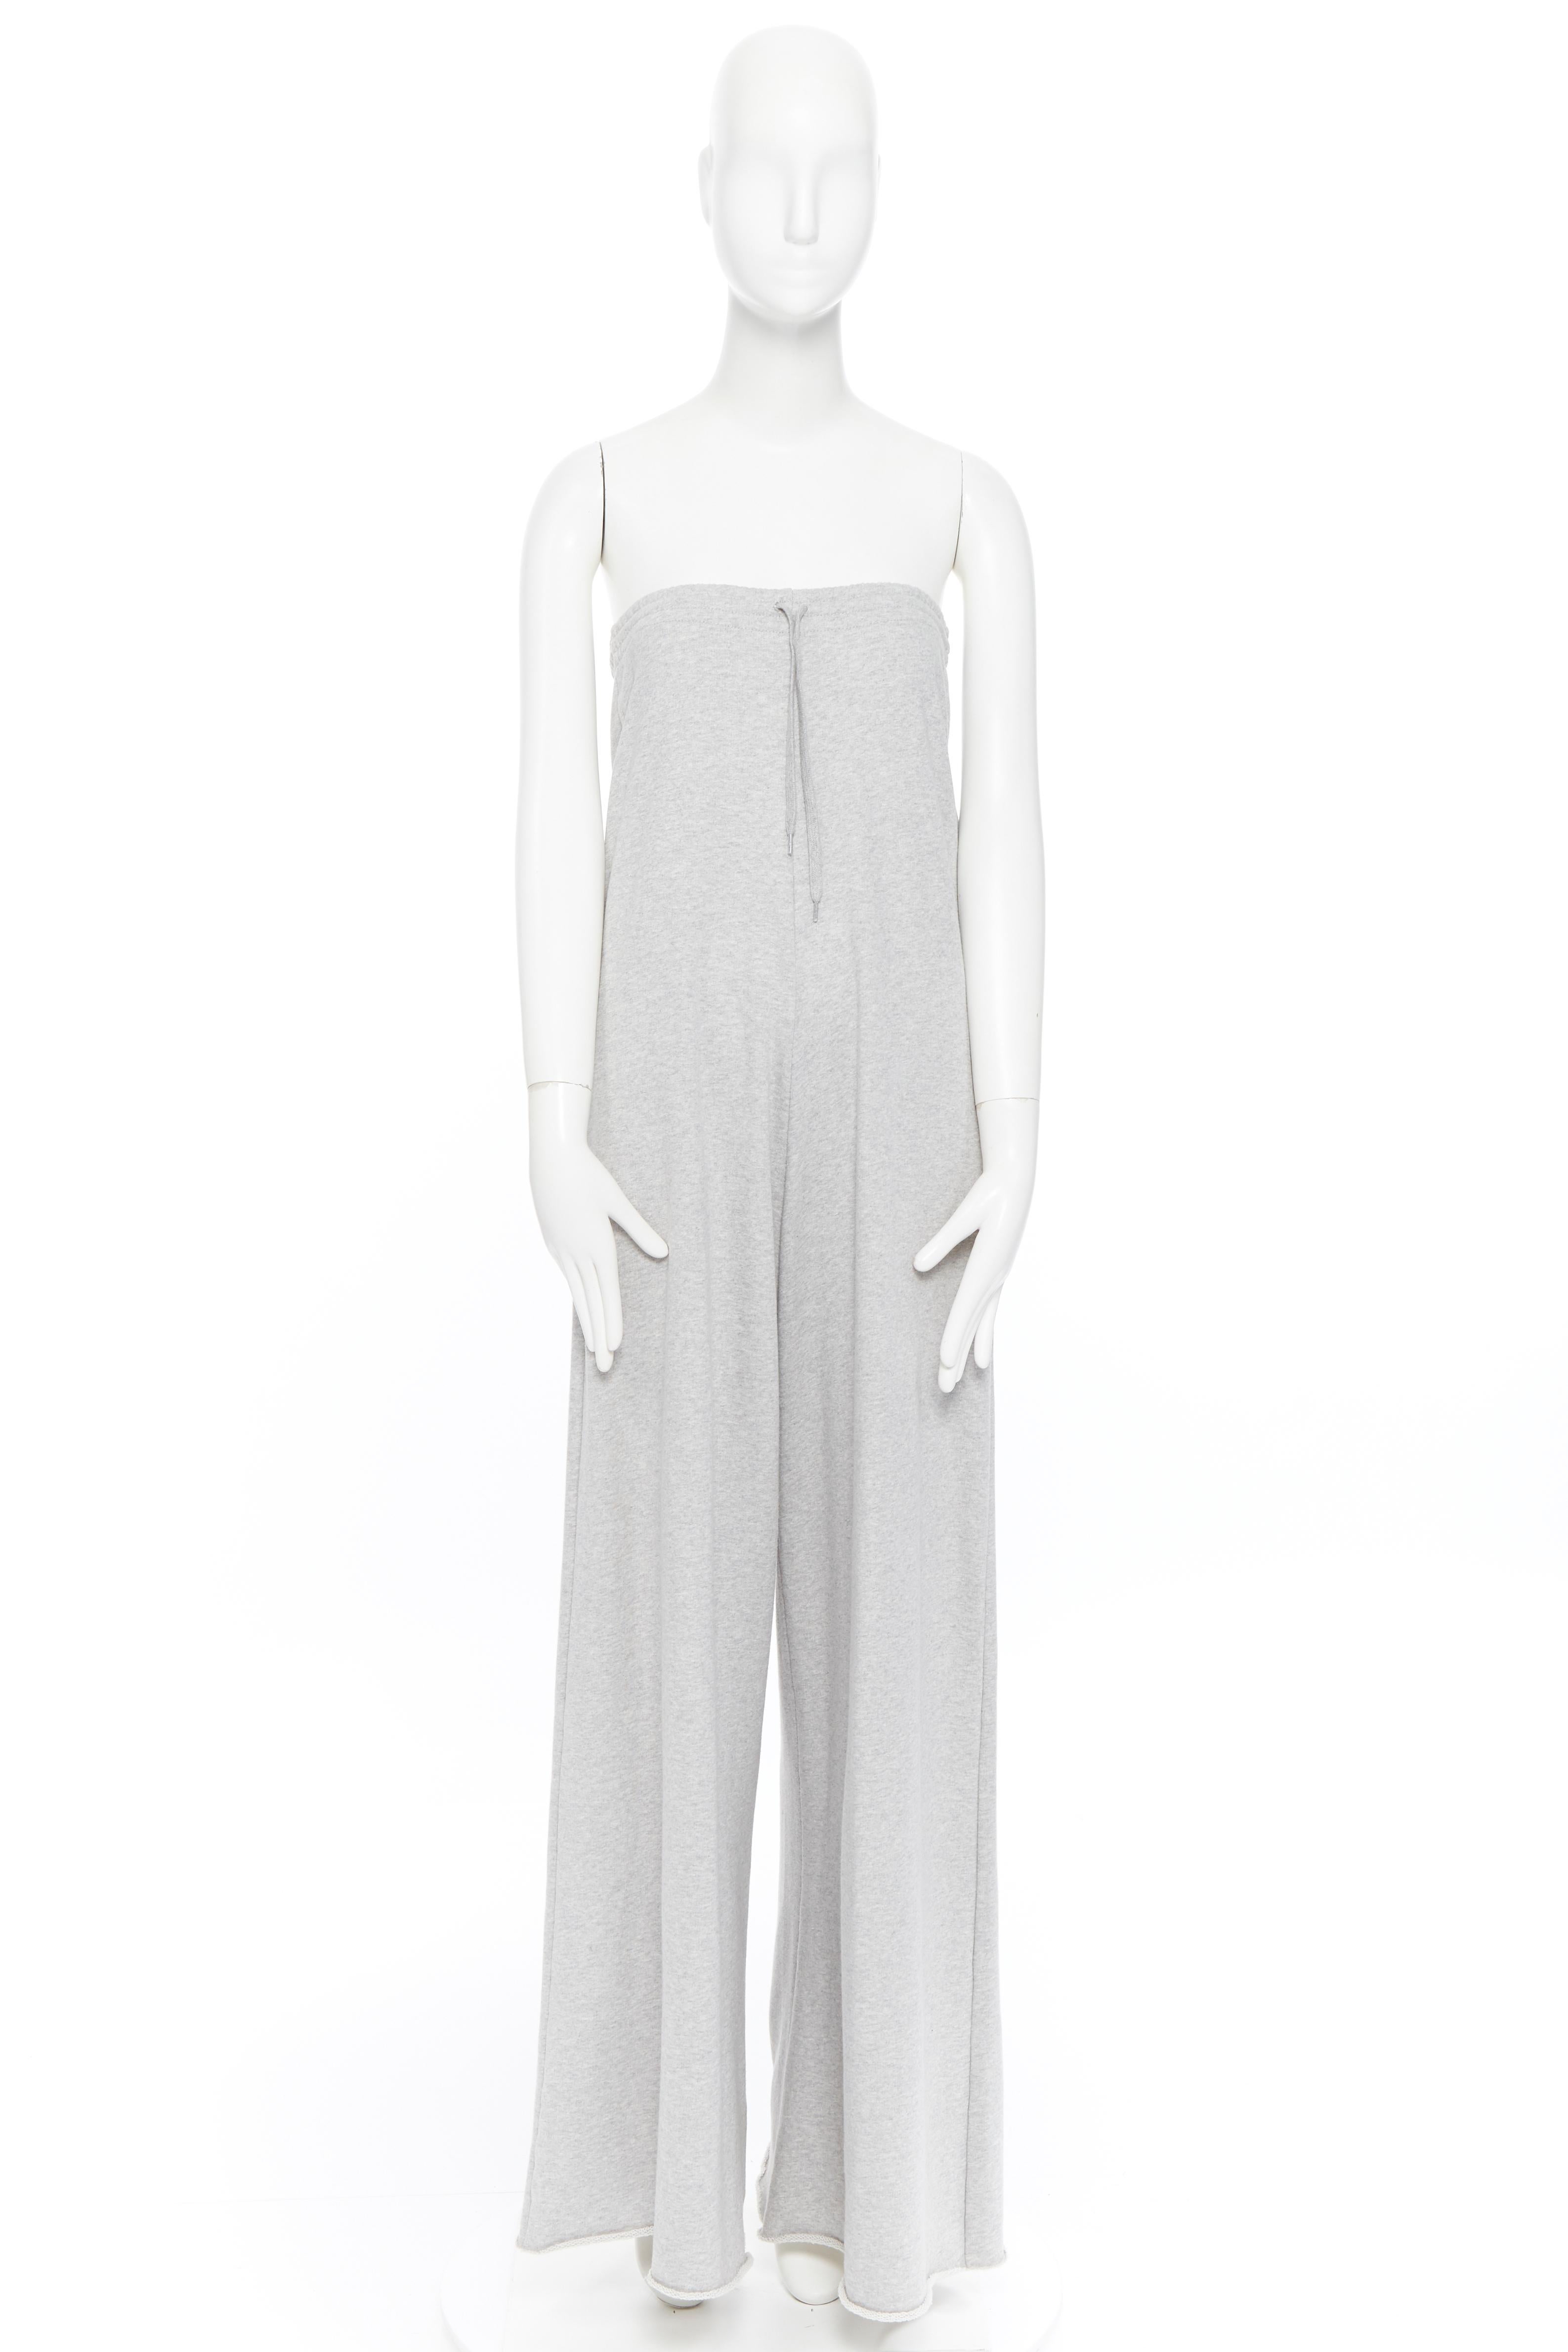 new VETEMENTS AW18 grey cotton oversized extreme wide leg sweatpants jumpsuit XS
Brand: Vetements
Designer: Demna Gvasalia
Collection: Fall Winter 2018
Model Name / Style: Jumpsuit
Material: Cotton, polyester
Color: Grey
Pattern: Solid
Closure: